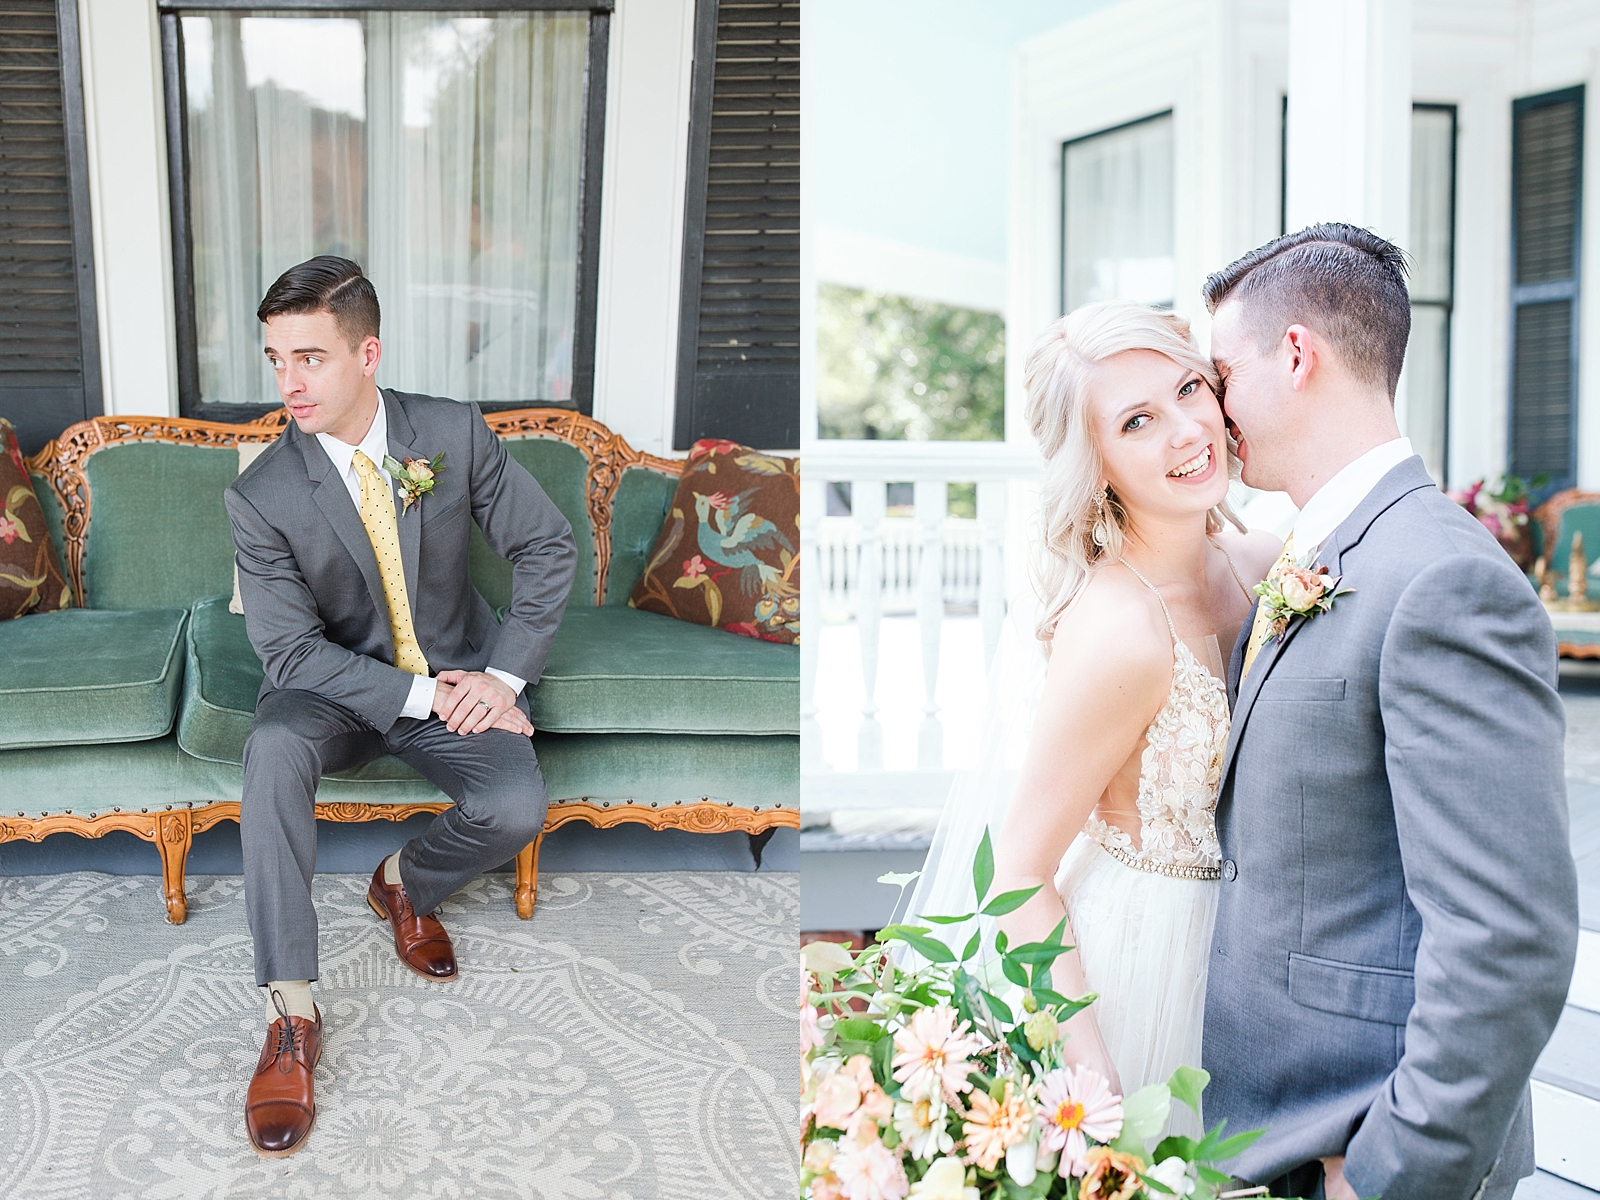 Columbia SC wedding venue groom sitting on vintage couch and bride and groom laughing photos